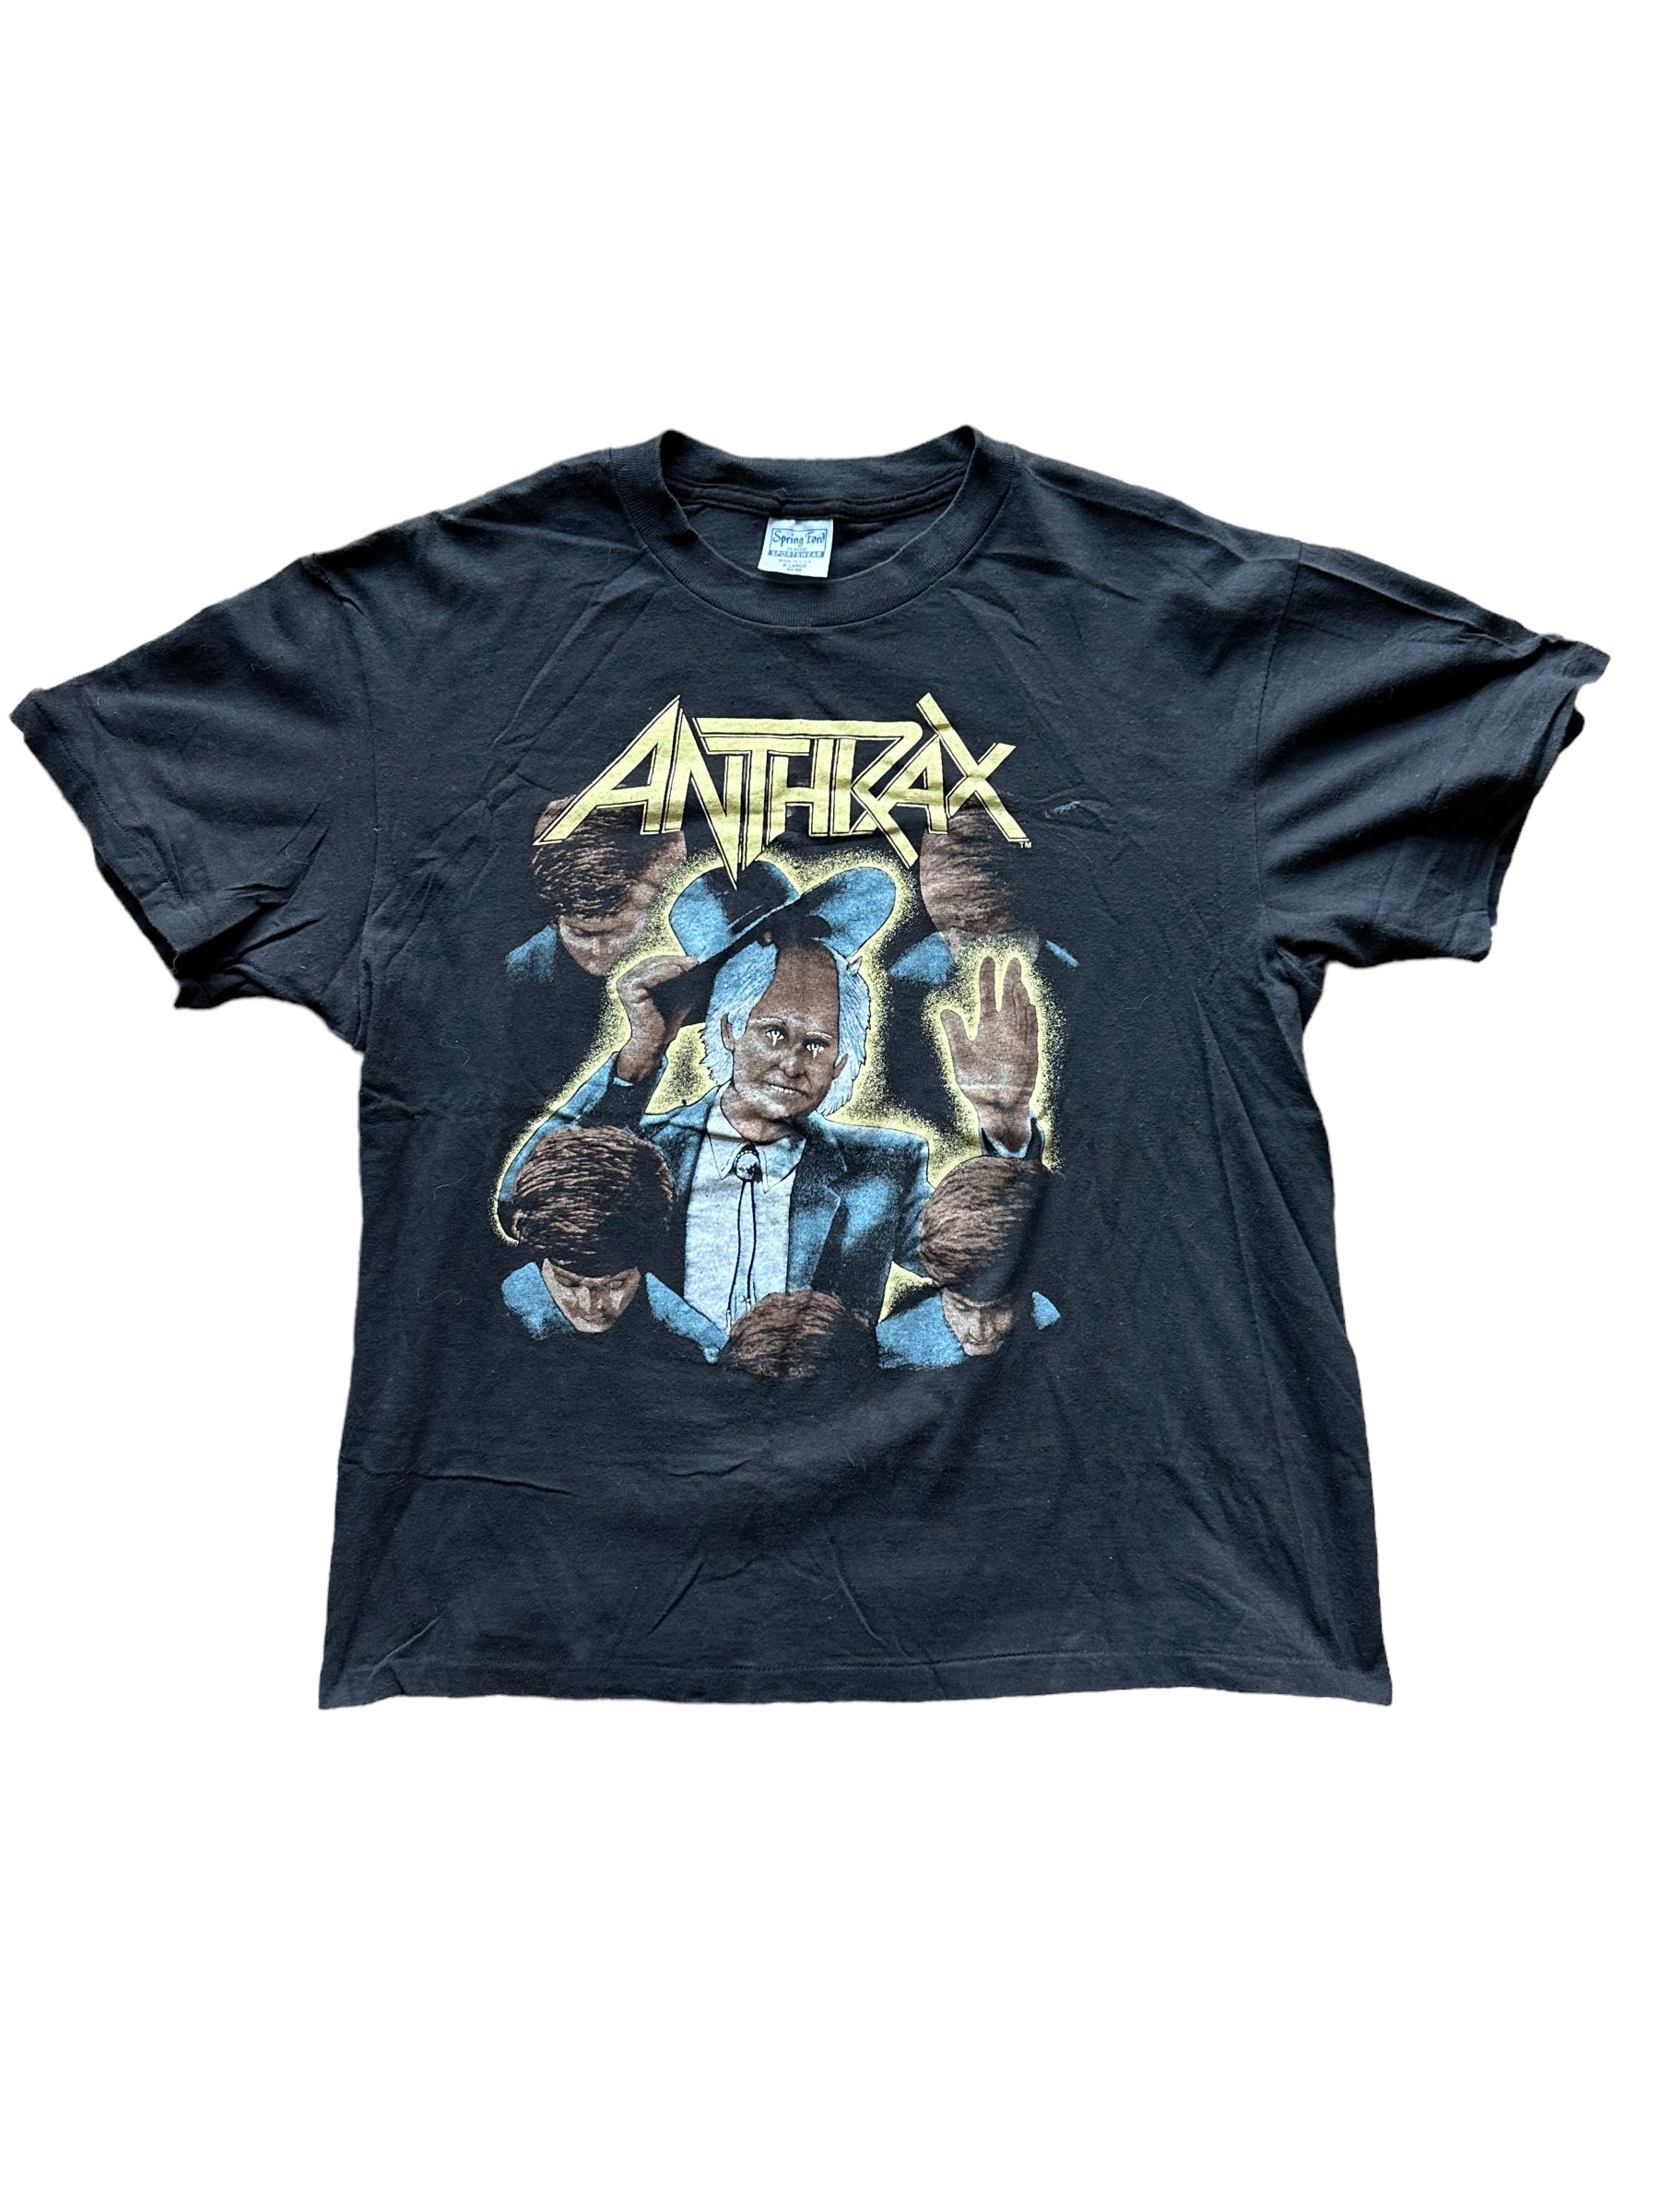 Front View of Vintage Anthrax Among the Living Tour Shirt Size XL |  Barn Owl Vintage | Vintage Rock Tee